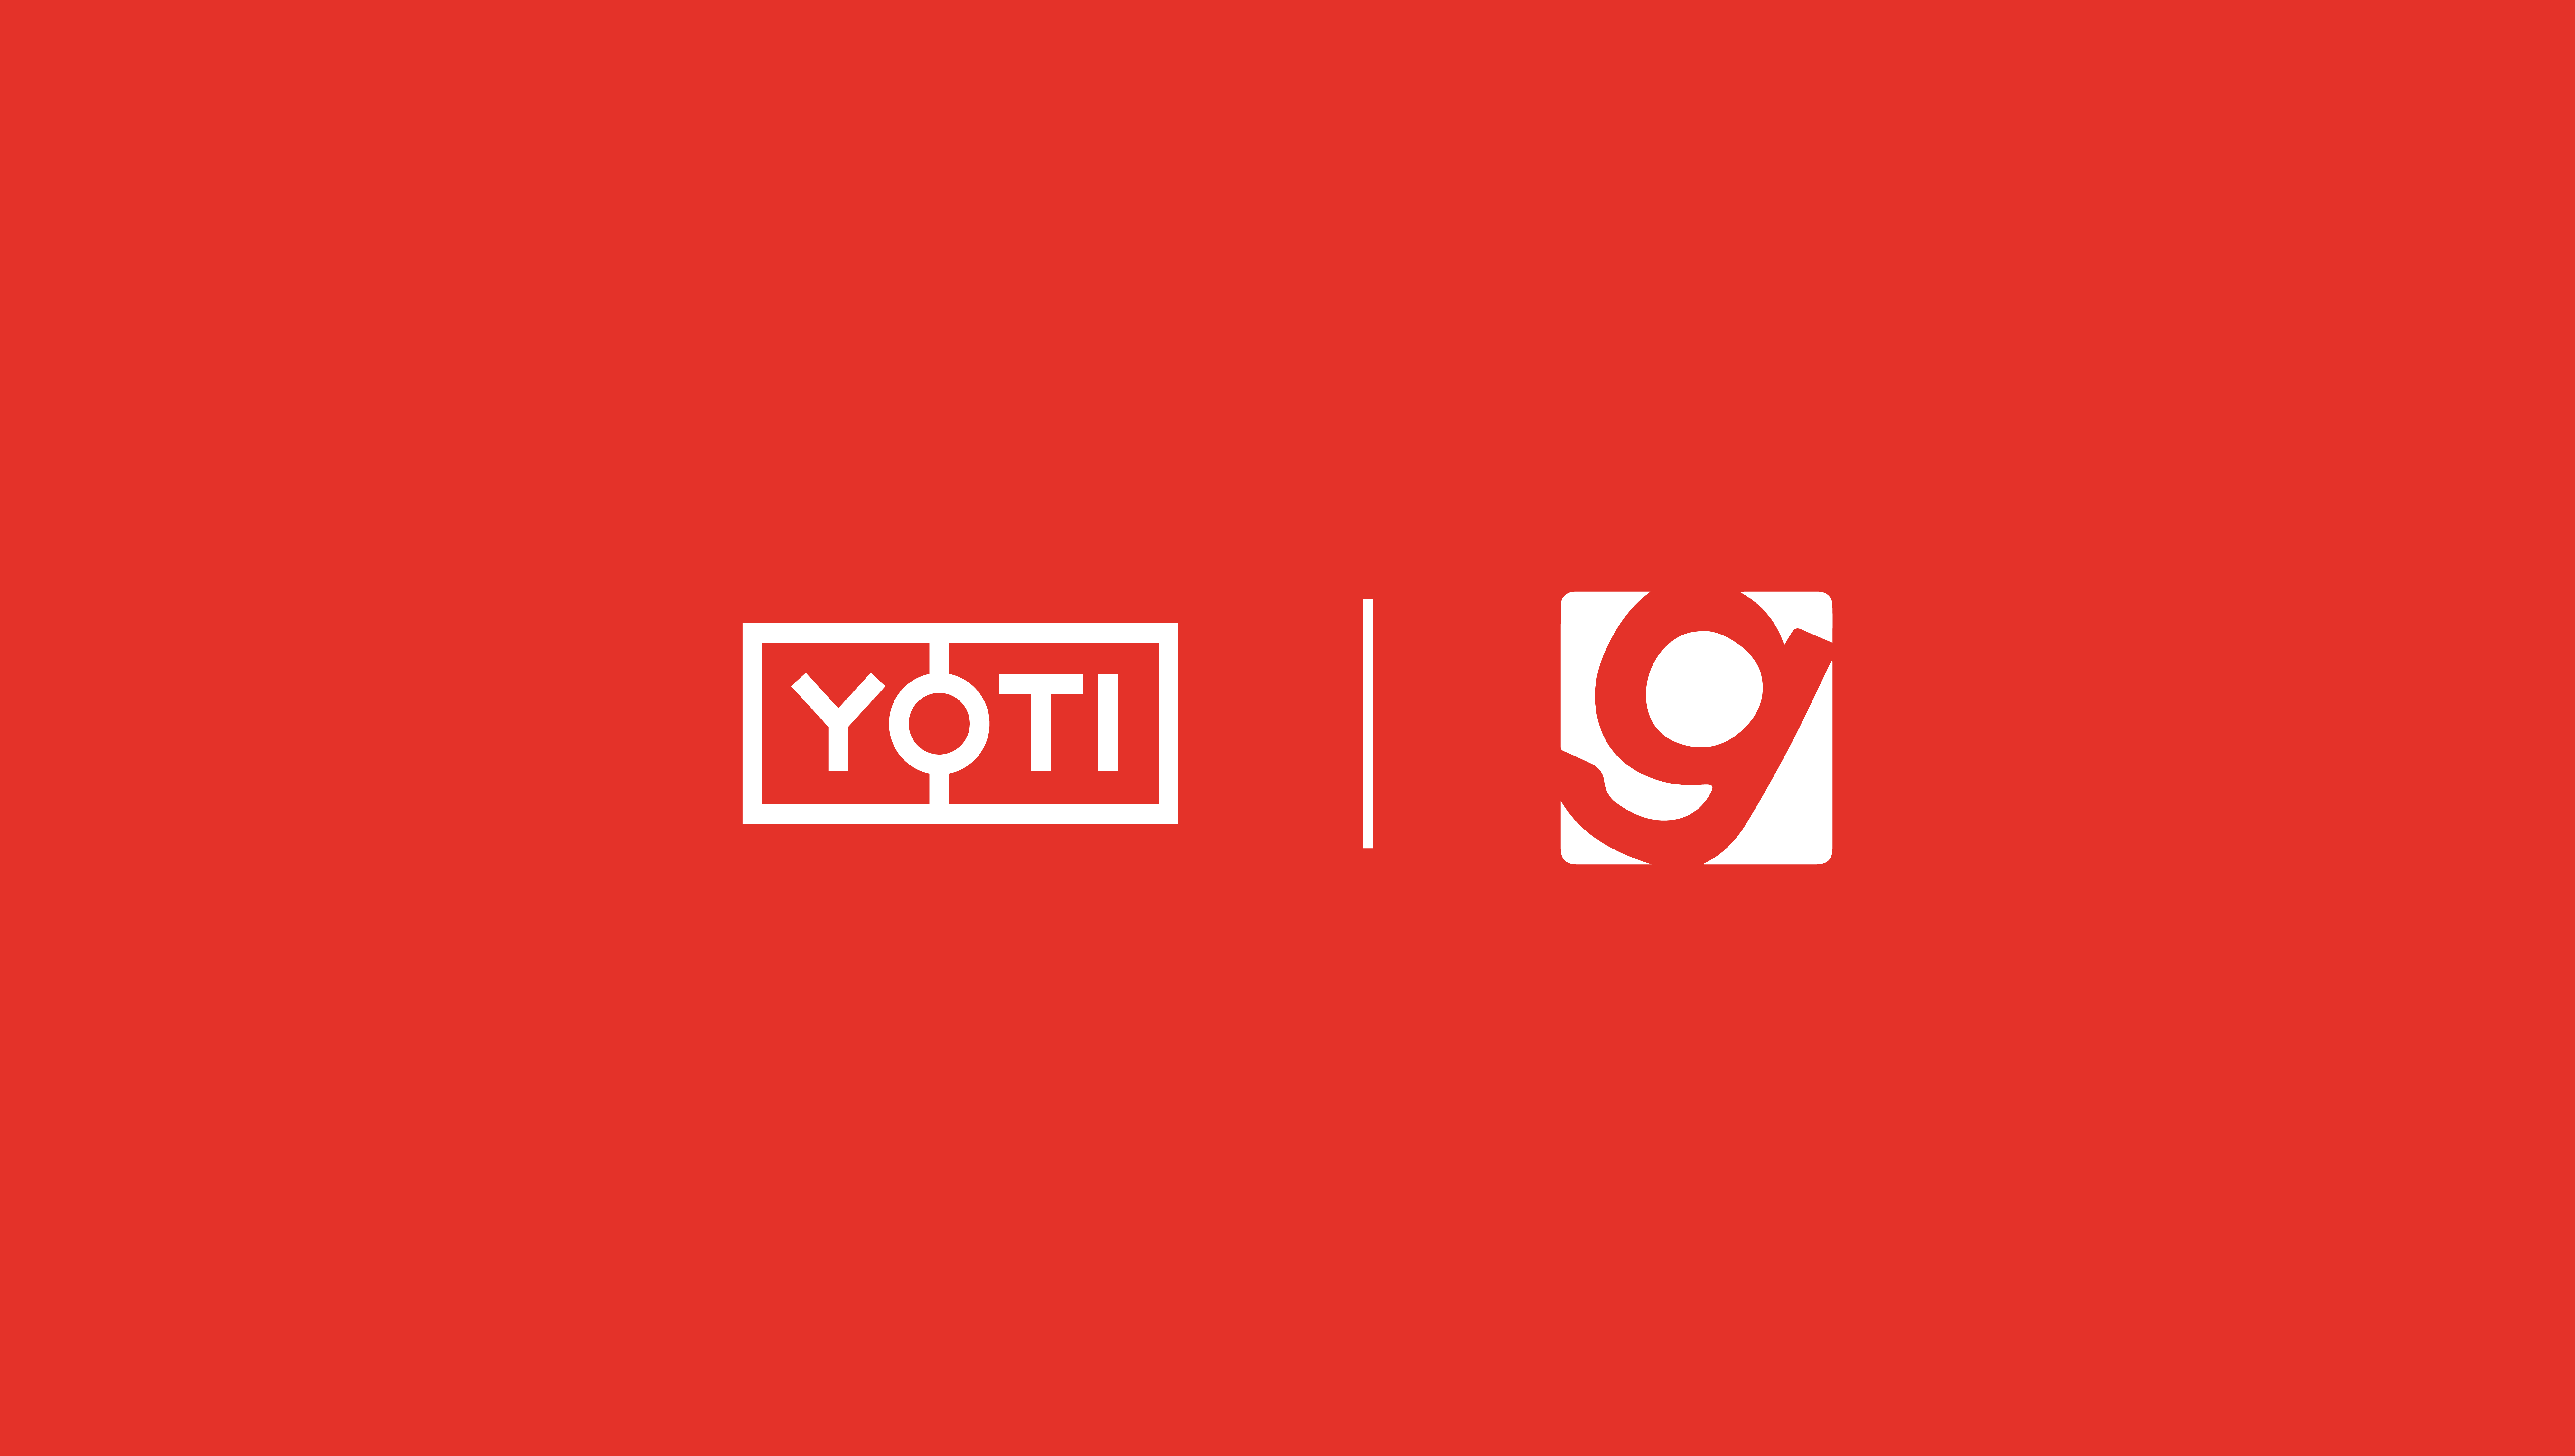 Yoti and Gamesys logos presented together